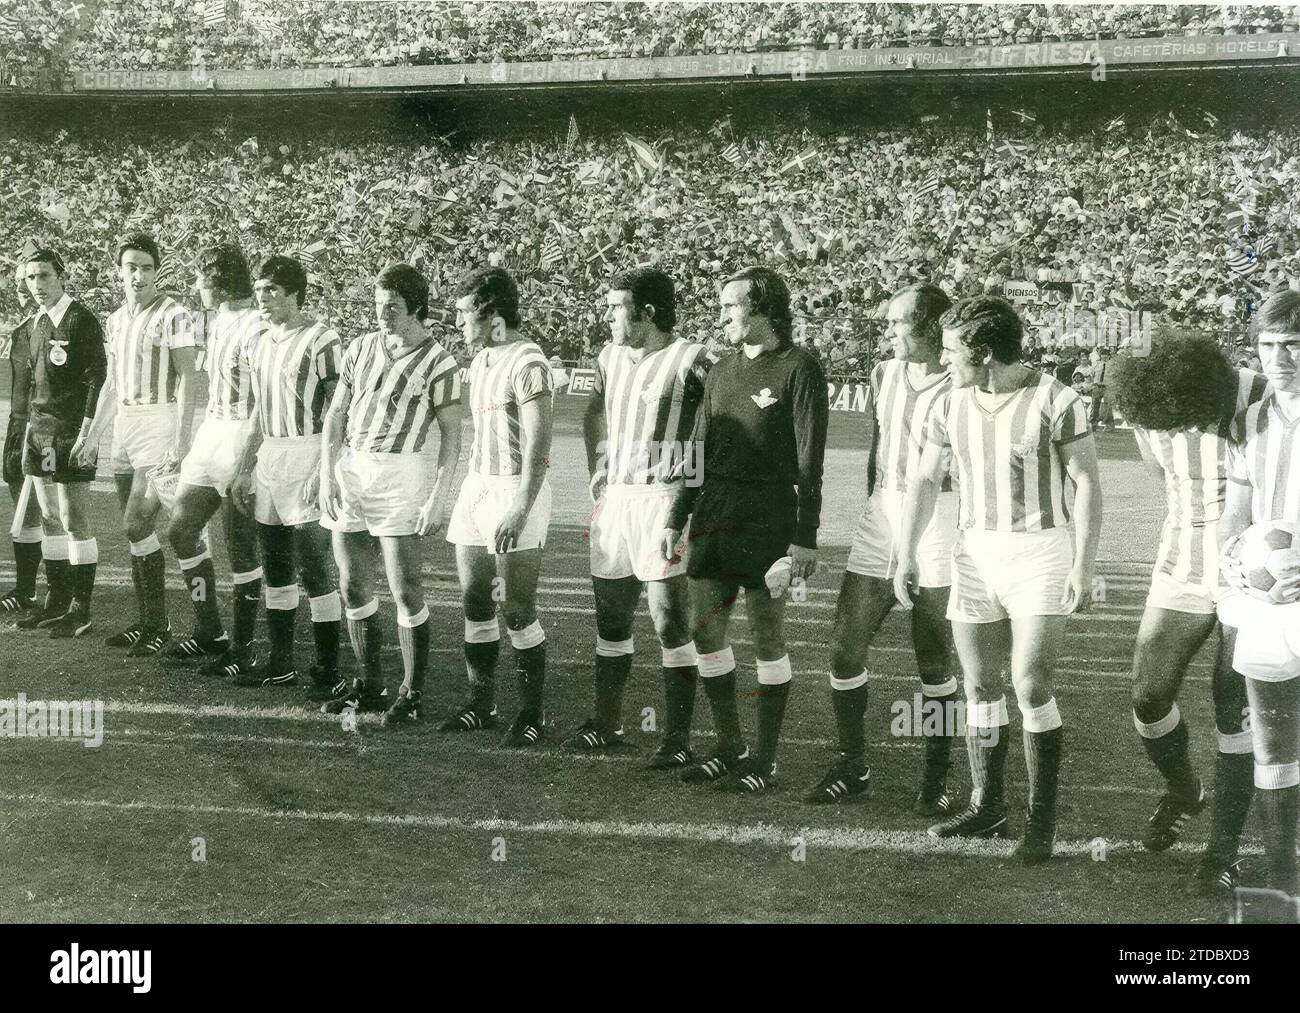 1977 cup final. - Betis players form in the center of the field Moments before starting the final of the King's Cup, Don Juan Carlos I's first. June 25, 1977, at the Vicente Calderón stadium in Madrid. Rival It was Athletic Bilbao, curiously the same rival as in the previous final played by the Verdiblancos, in 1931 and won by the Basques. On this occasion, Betis won in the penalty shootout, after finishing the match and its overtime with a 2-2 tie. In the image the Players appear, from left to right, Cobo (Captain), Alabanda, Biosca, López, Bizcocho, Sabaté, Esnaola, García Soriano, Benítez, Stock Photo